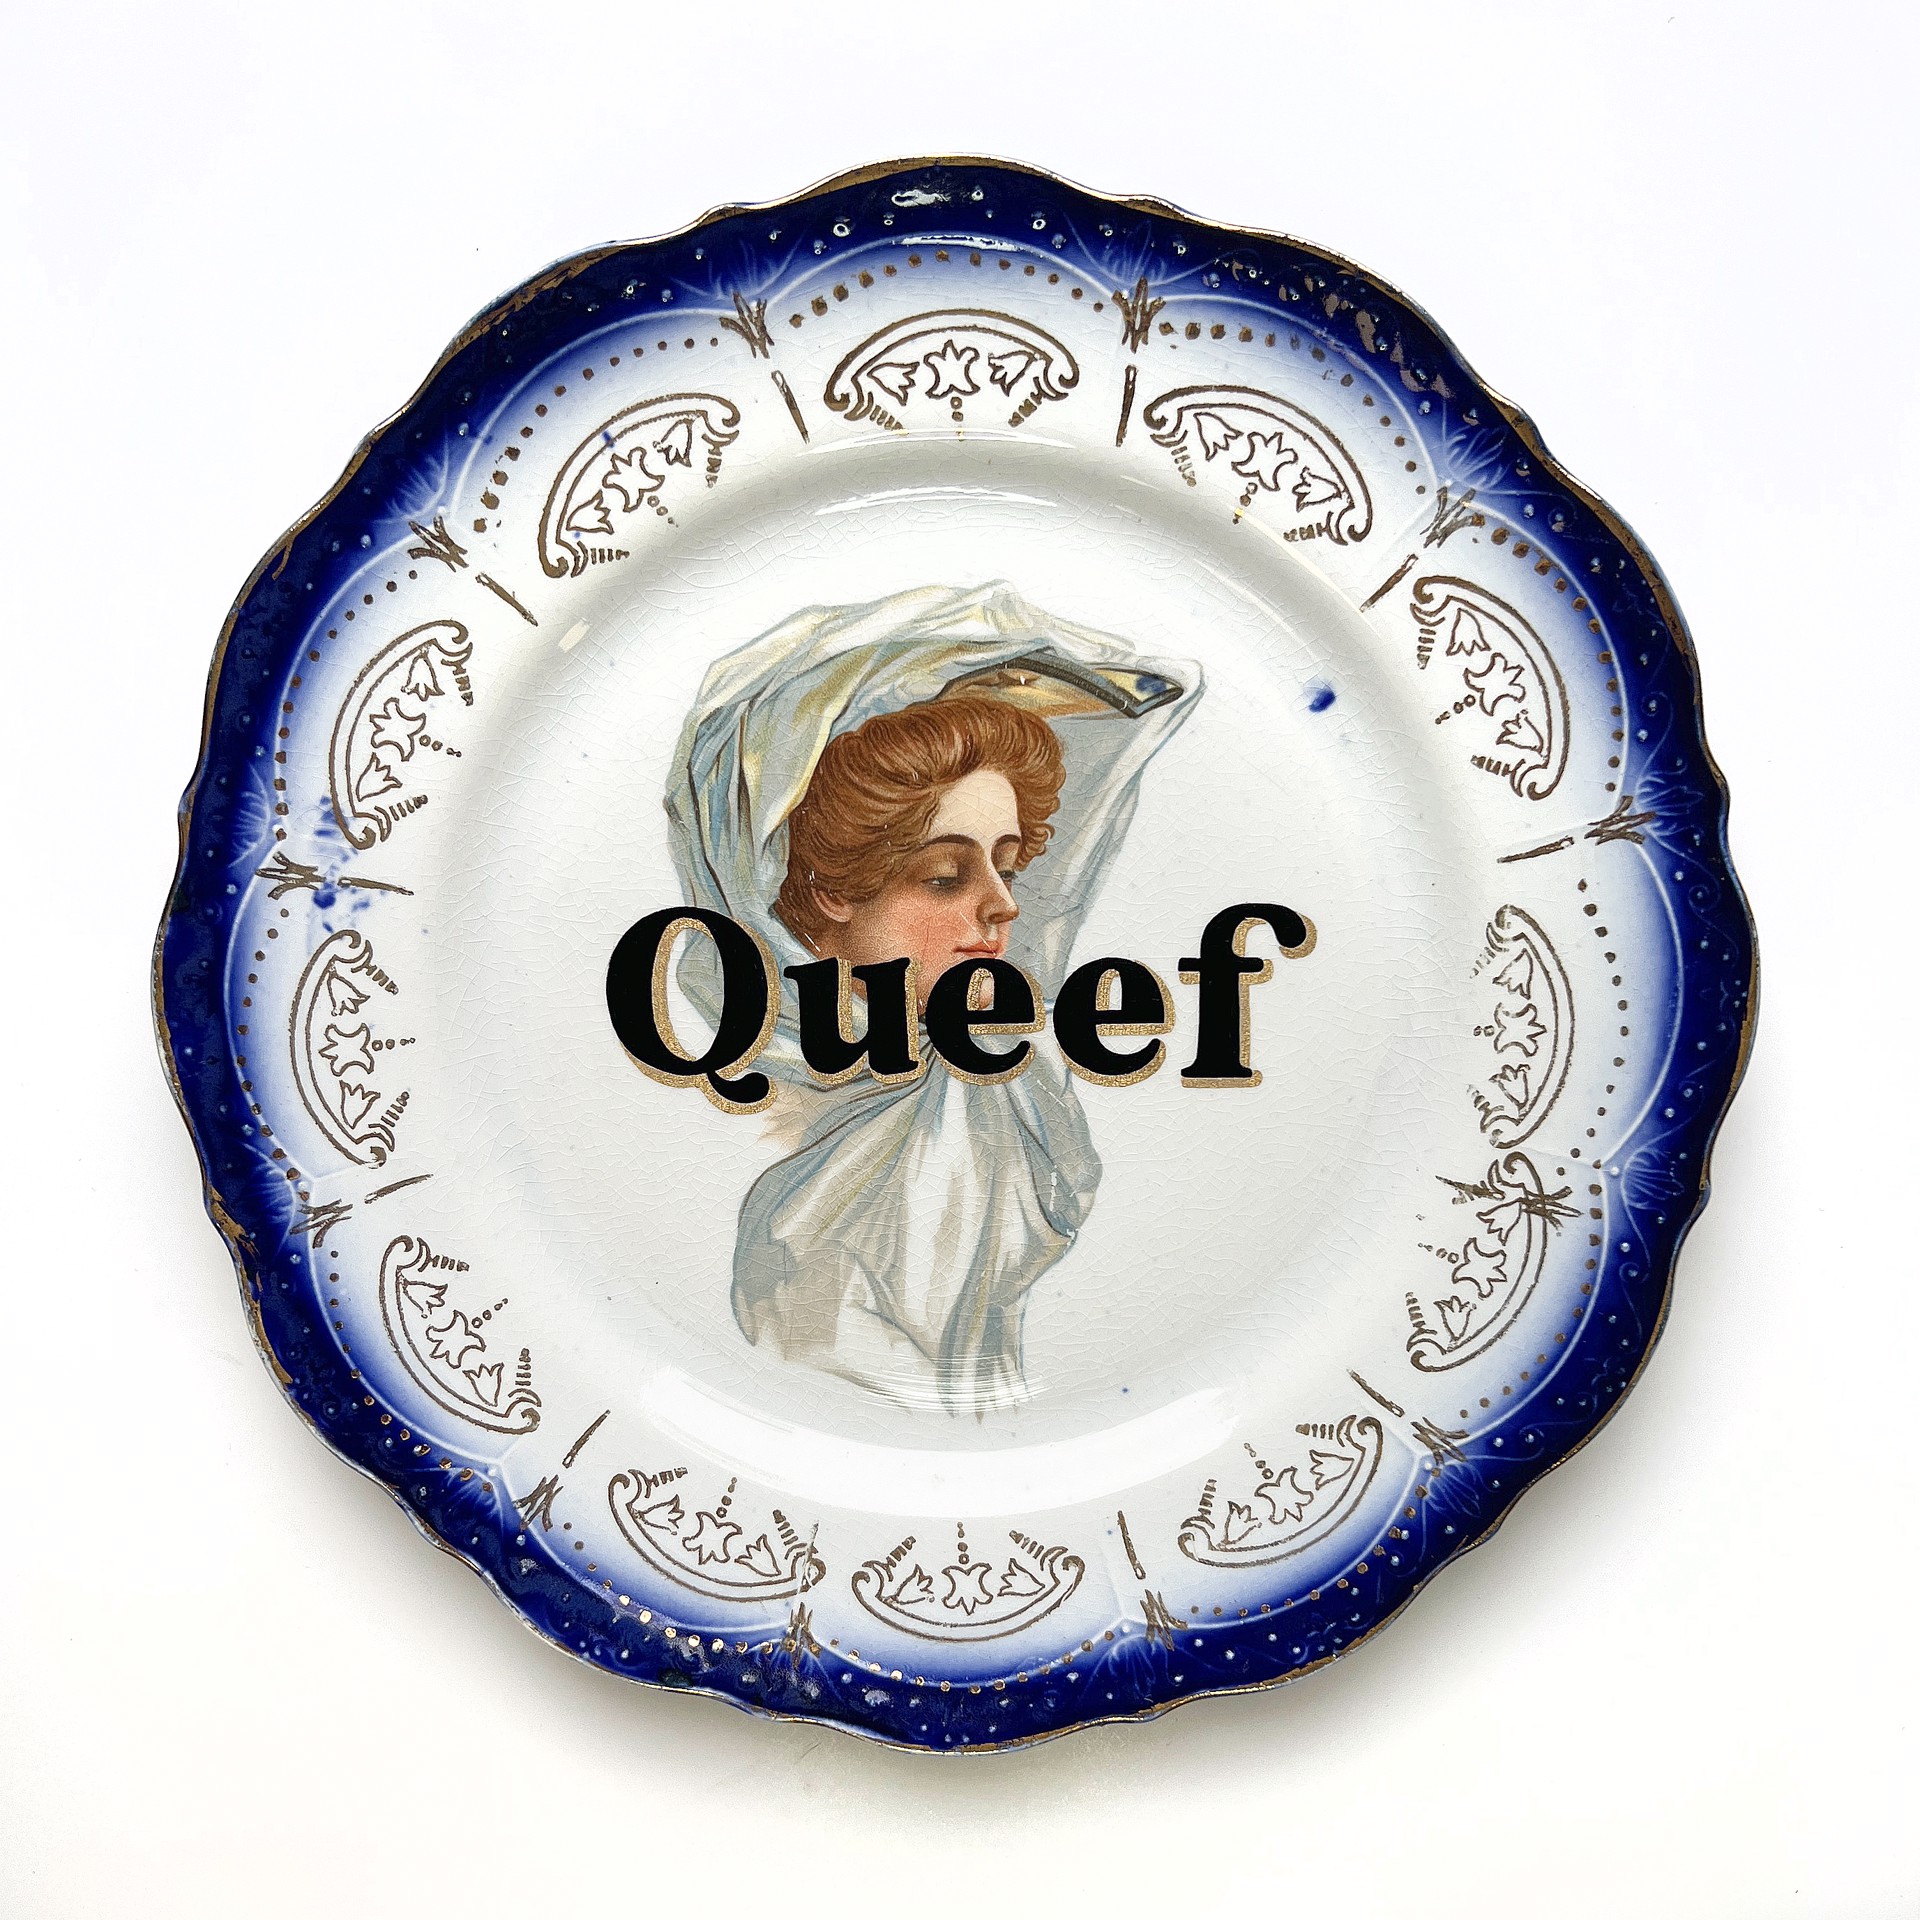 Queef by Marie-Claude Marquis